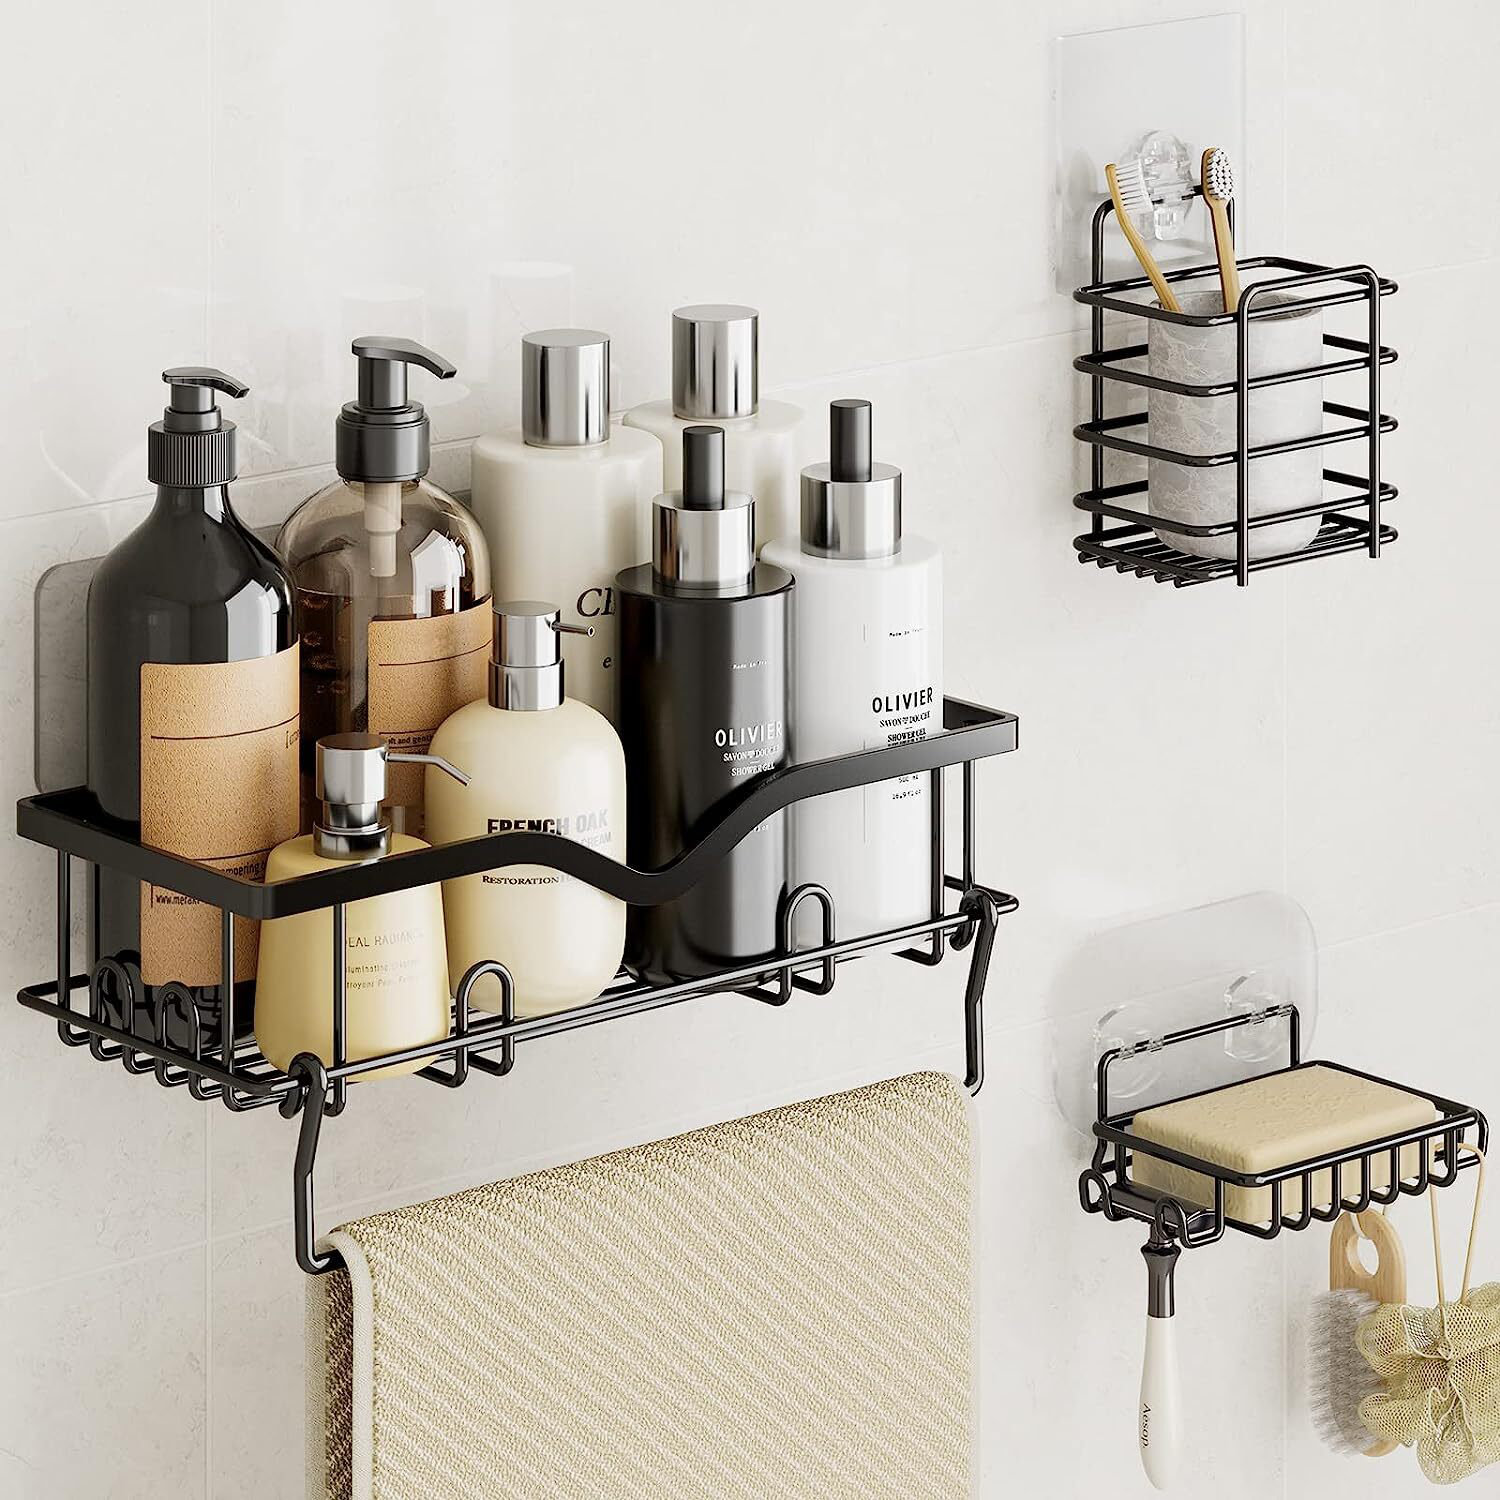 Rebrilliant Adhesive Stainless Steel Shower Caddy & Reviews | Wayfair